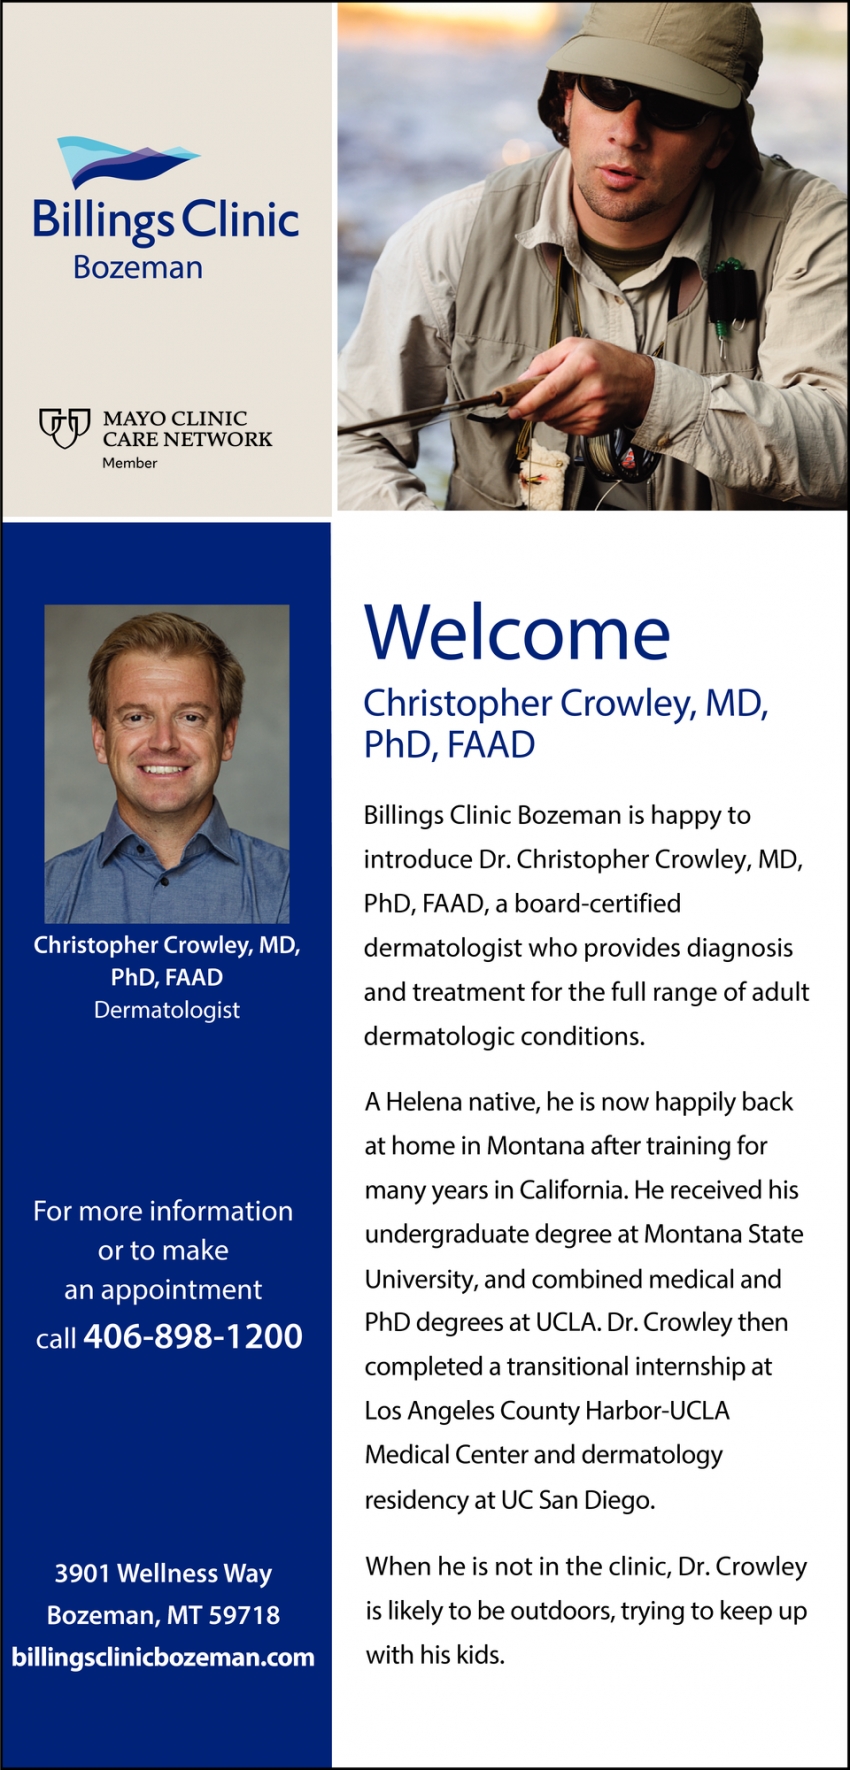 Welcome Christopher Crowley, MD, PhD, FAAD